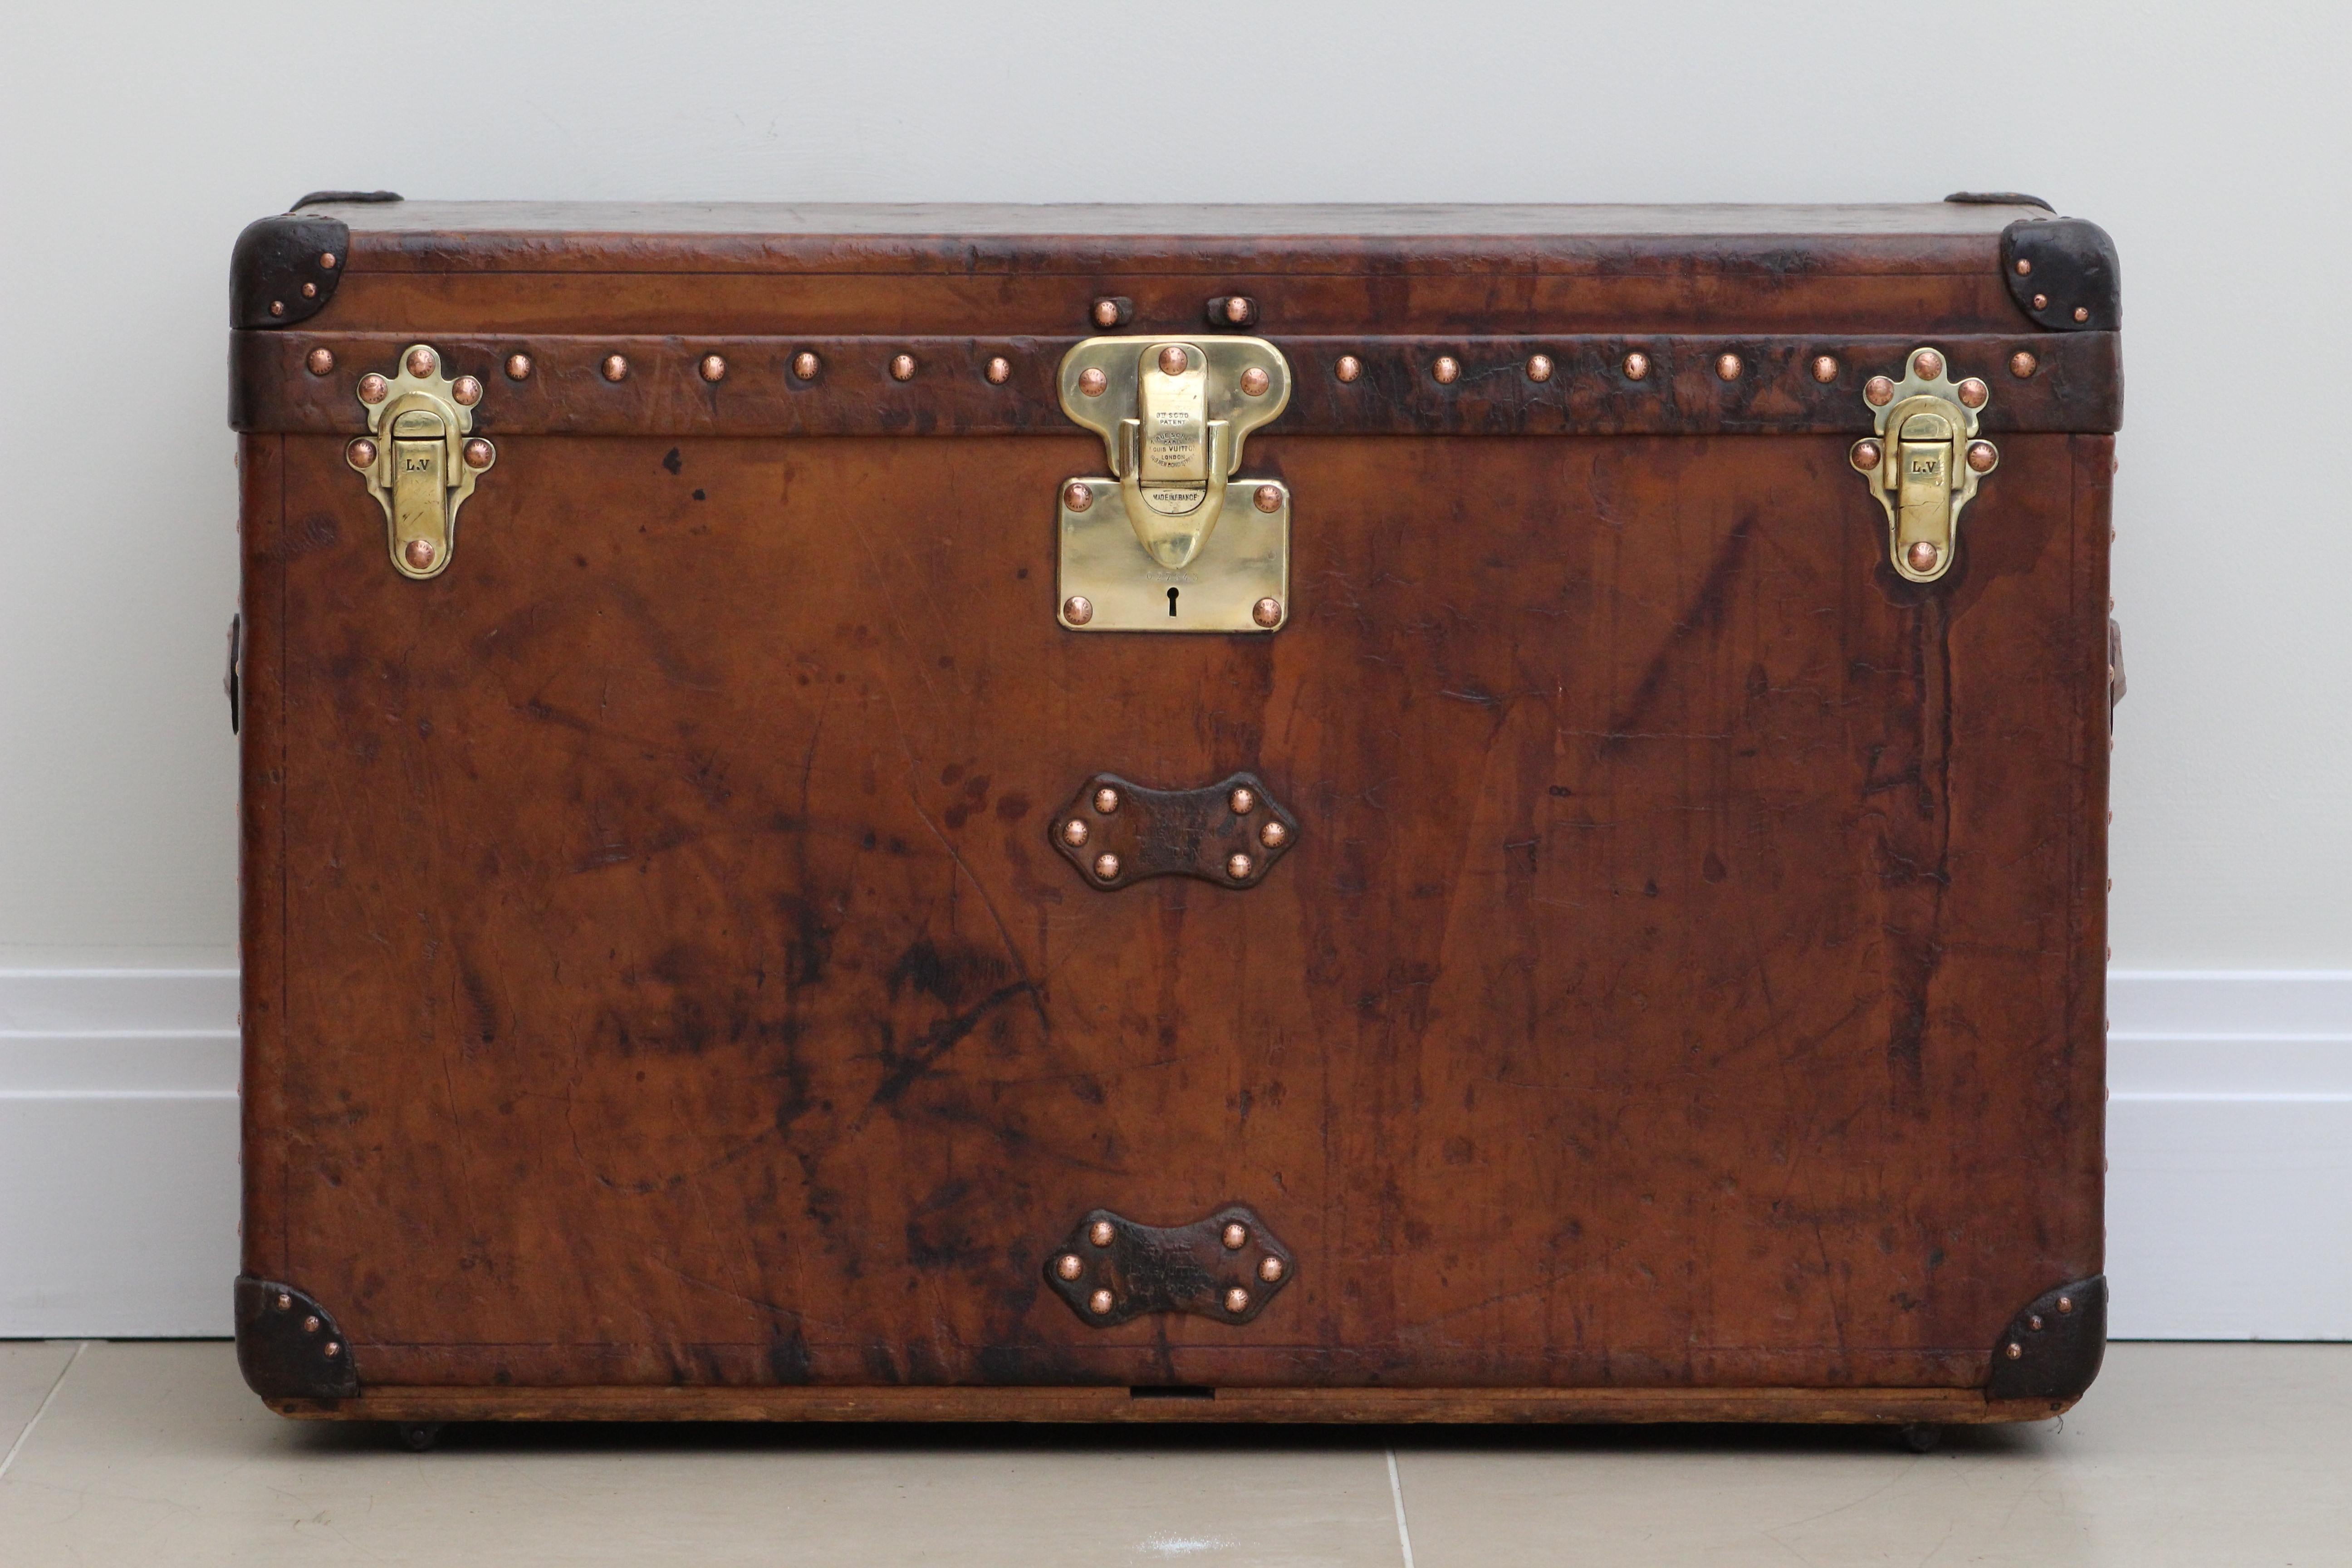 The 1920s Louis Vuitton Cowhide Leather Custom Trunk is a true embodiment of luxury, craftsmanship, and personal history. An artifact from a time when travel was a grand affair, this trunk is a perfect blend of form, function, and artistry, echoing